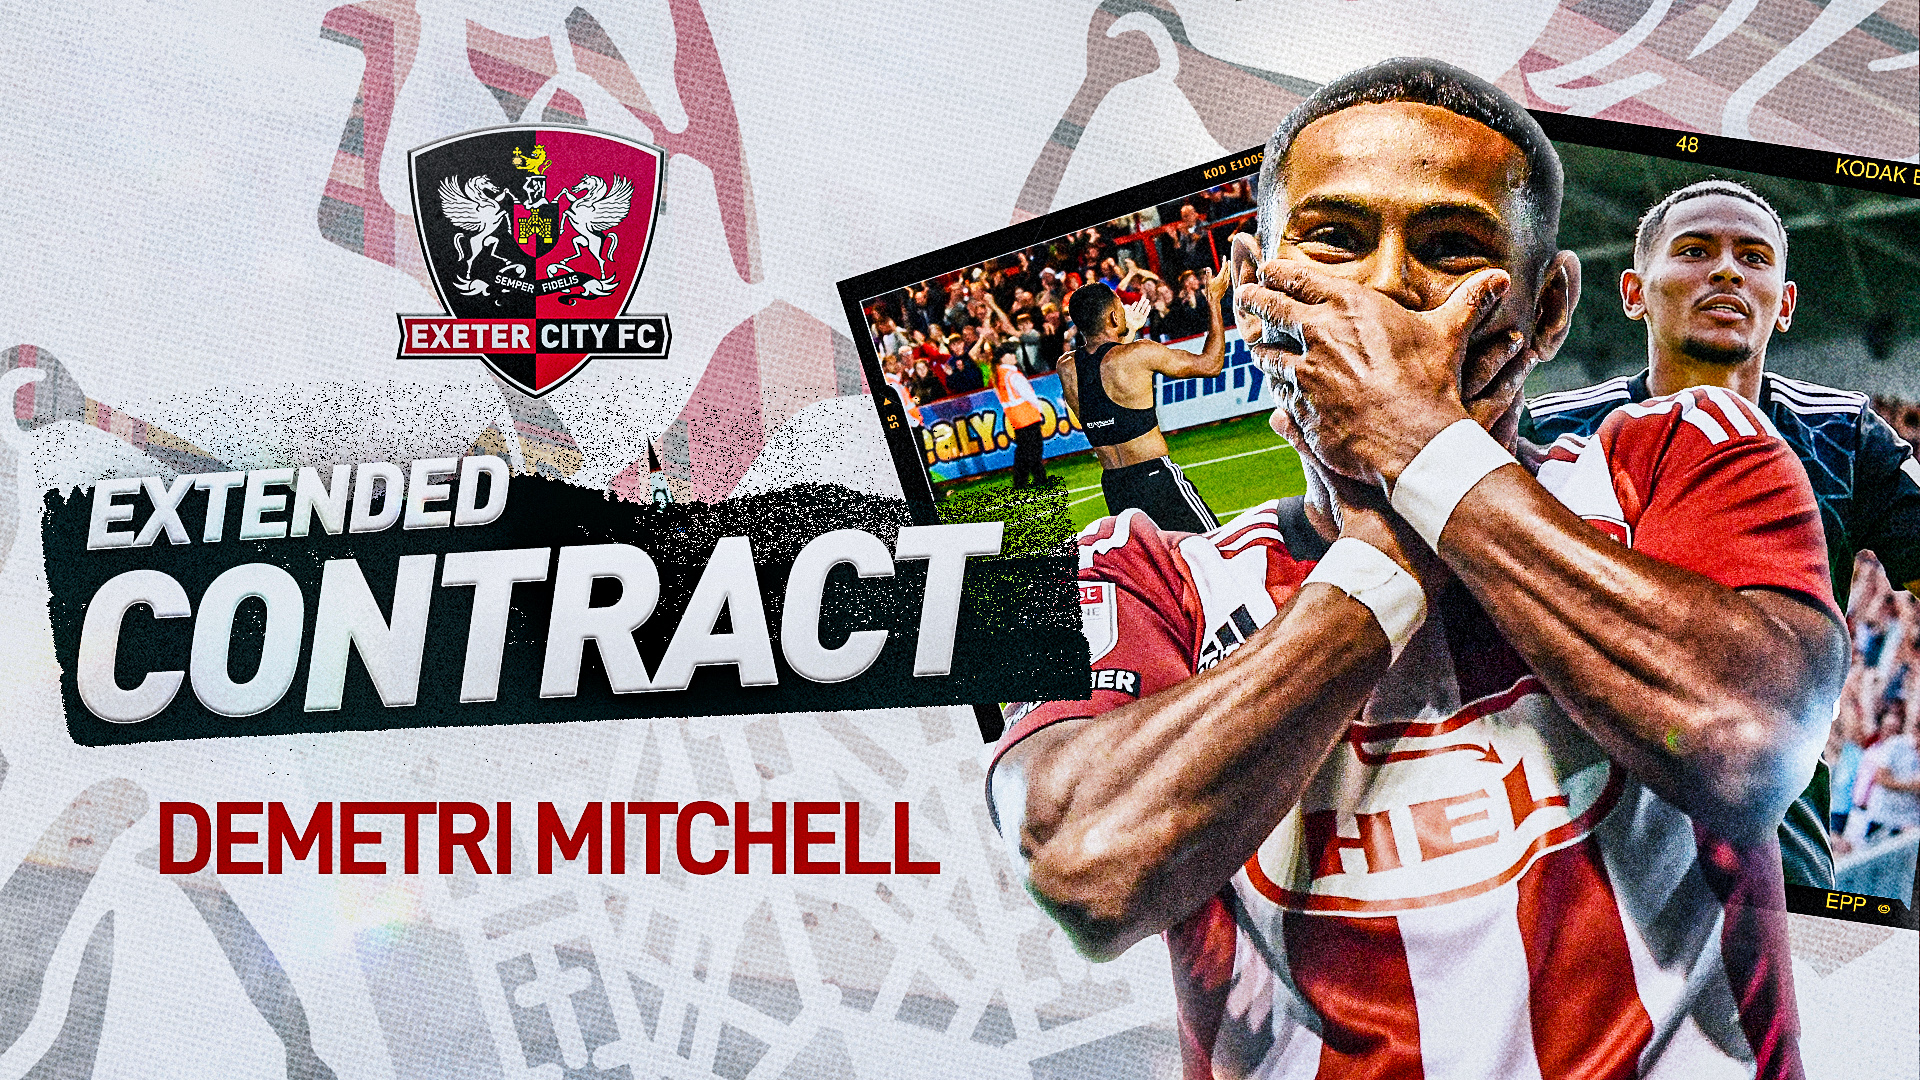 Image of Demetri Mitchell with the words 'Extended Contract'